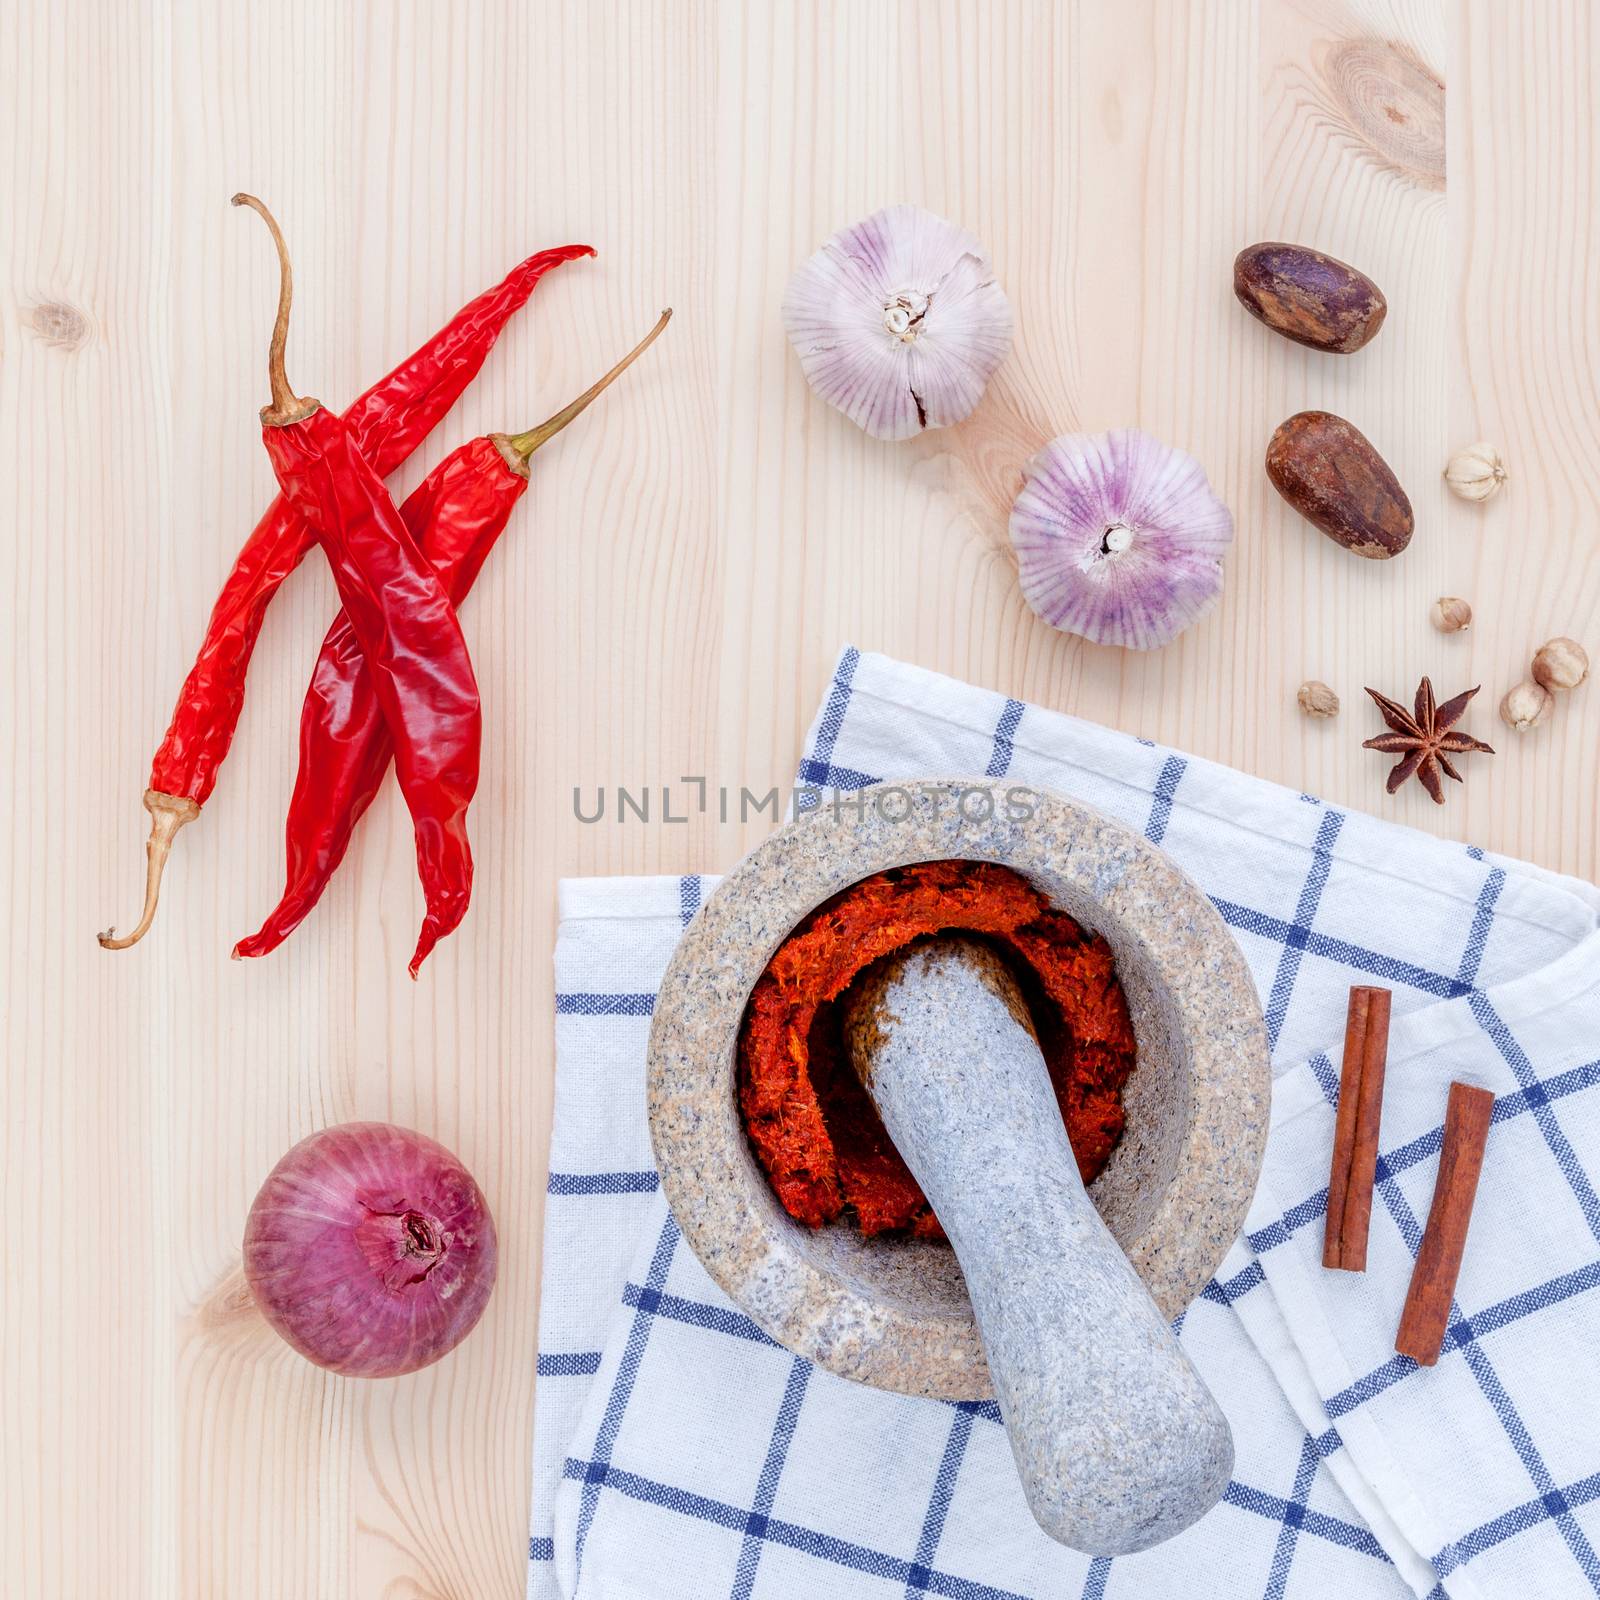 Assortment of spices ingredients and paste of thai popular food red curry with mortar set up on wooden table.